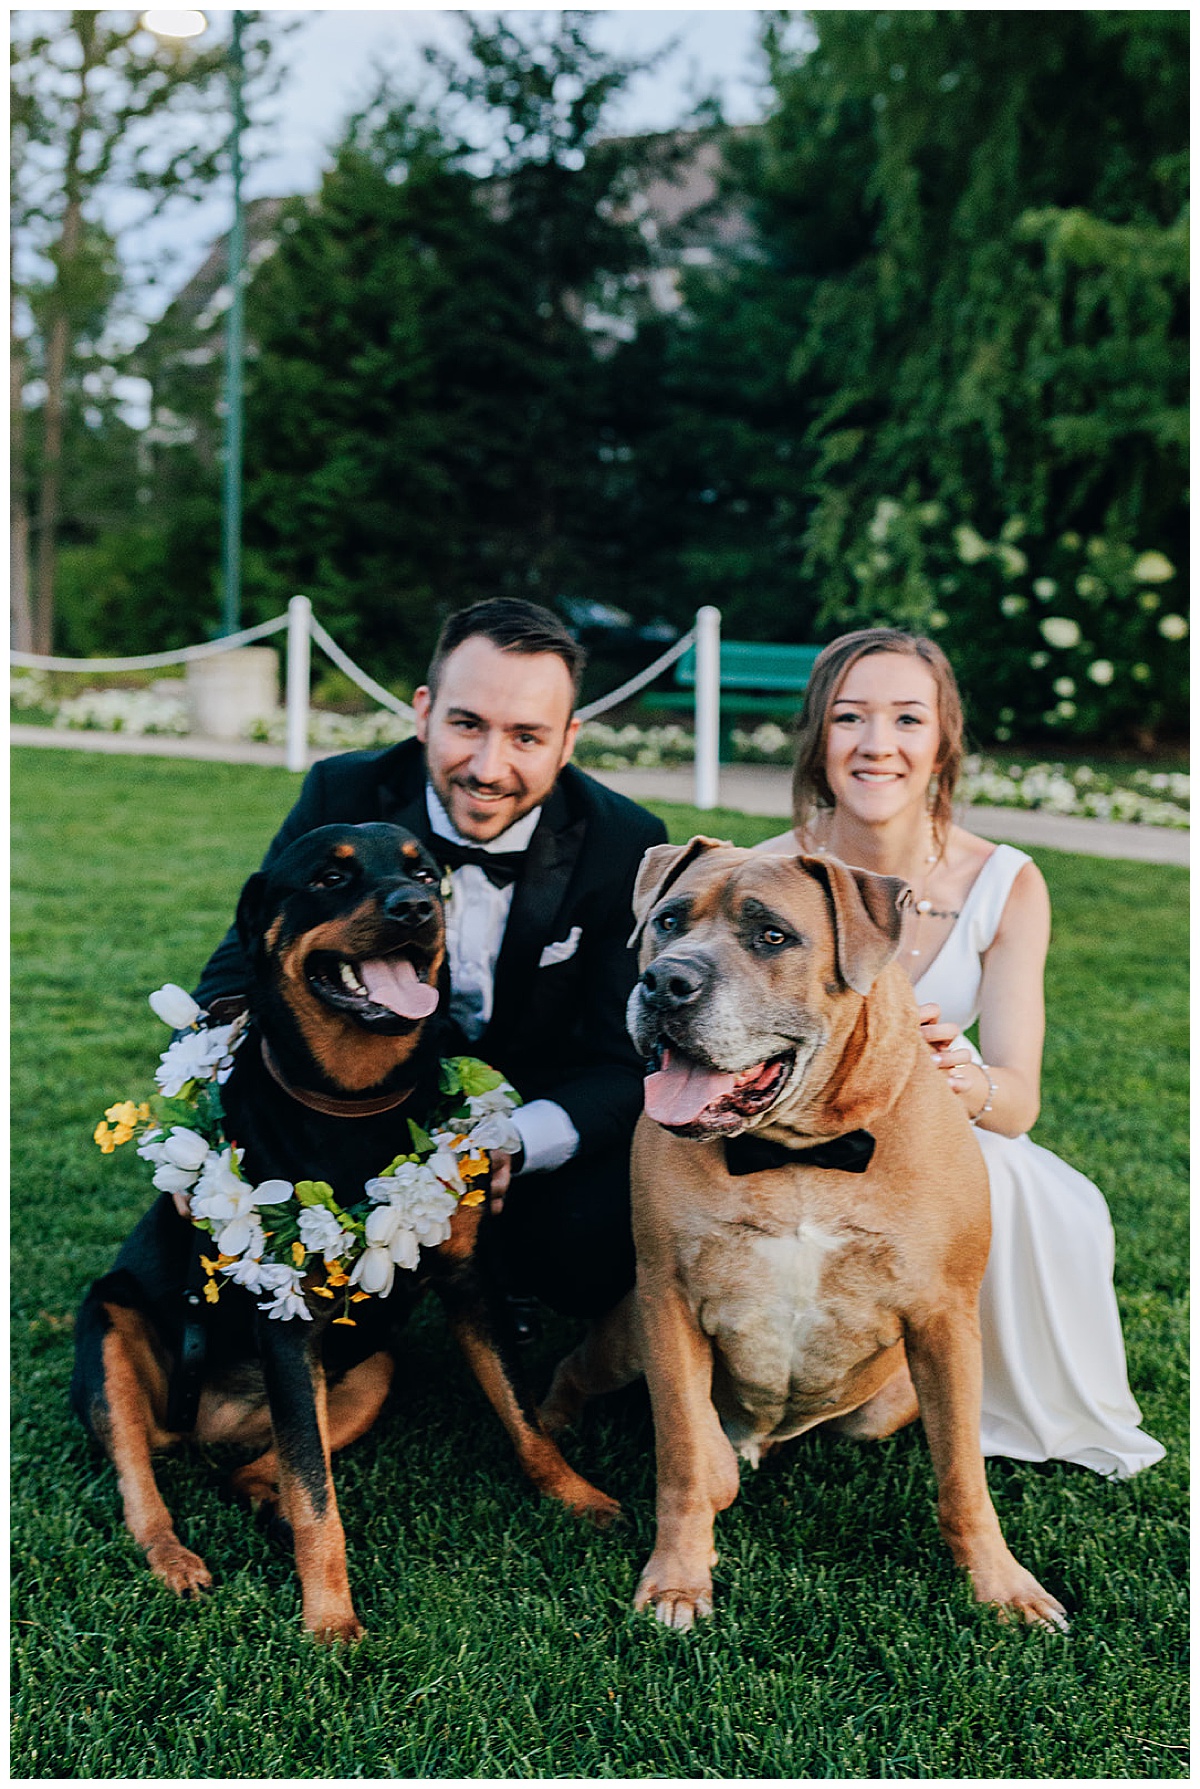 Husband and wife with dogs for Kayla Bouren Photography